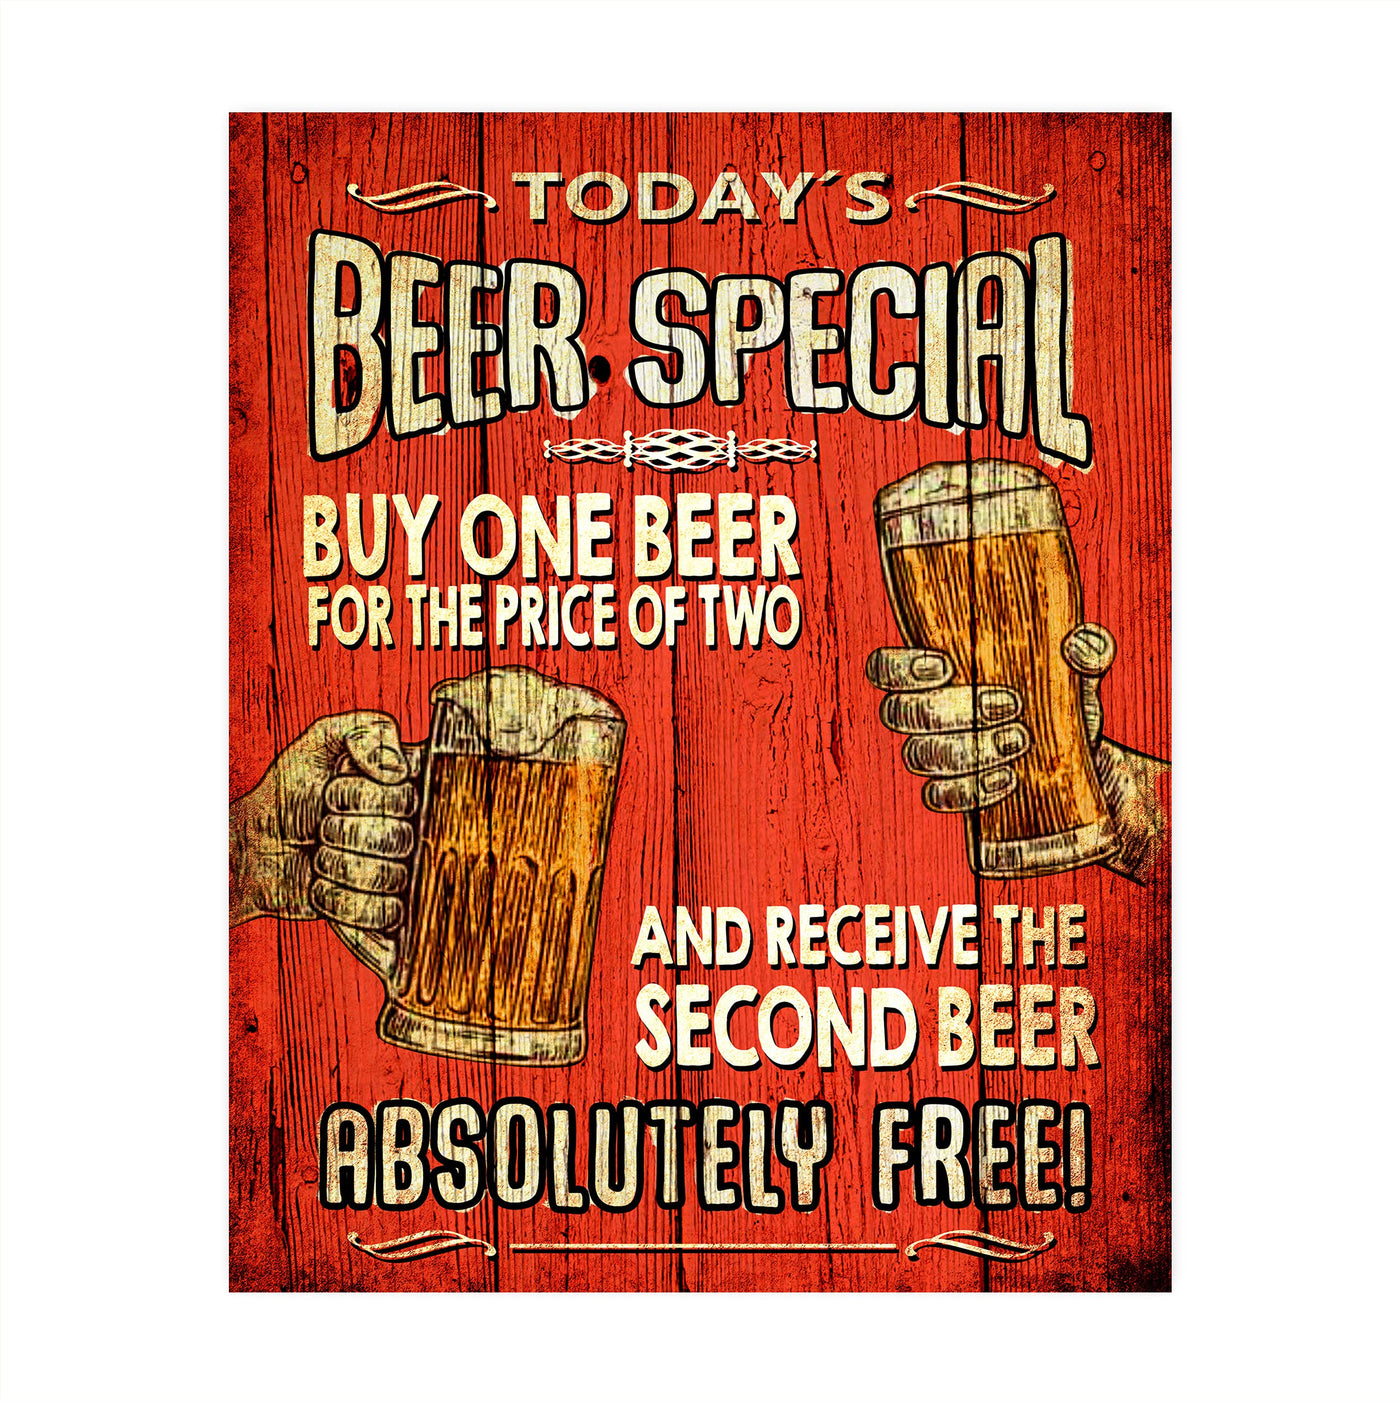 Today's Beer Special-Buy One Beer for Price of Two Funny Bar Sign -8x10" Rustic Beer & Alcohol Wall Art Print-Ready to Frame. Humorous Home-Cave-Garage-Shop Decor. Fun Gift! Printed On Photo Paper.